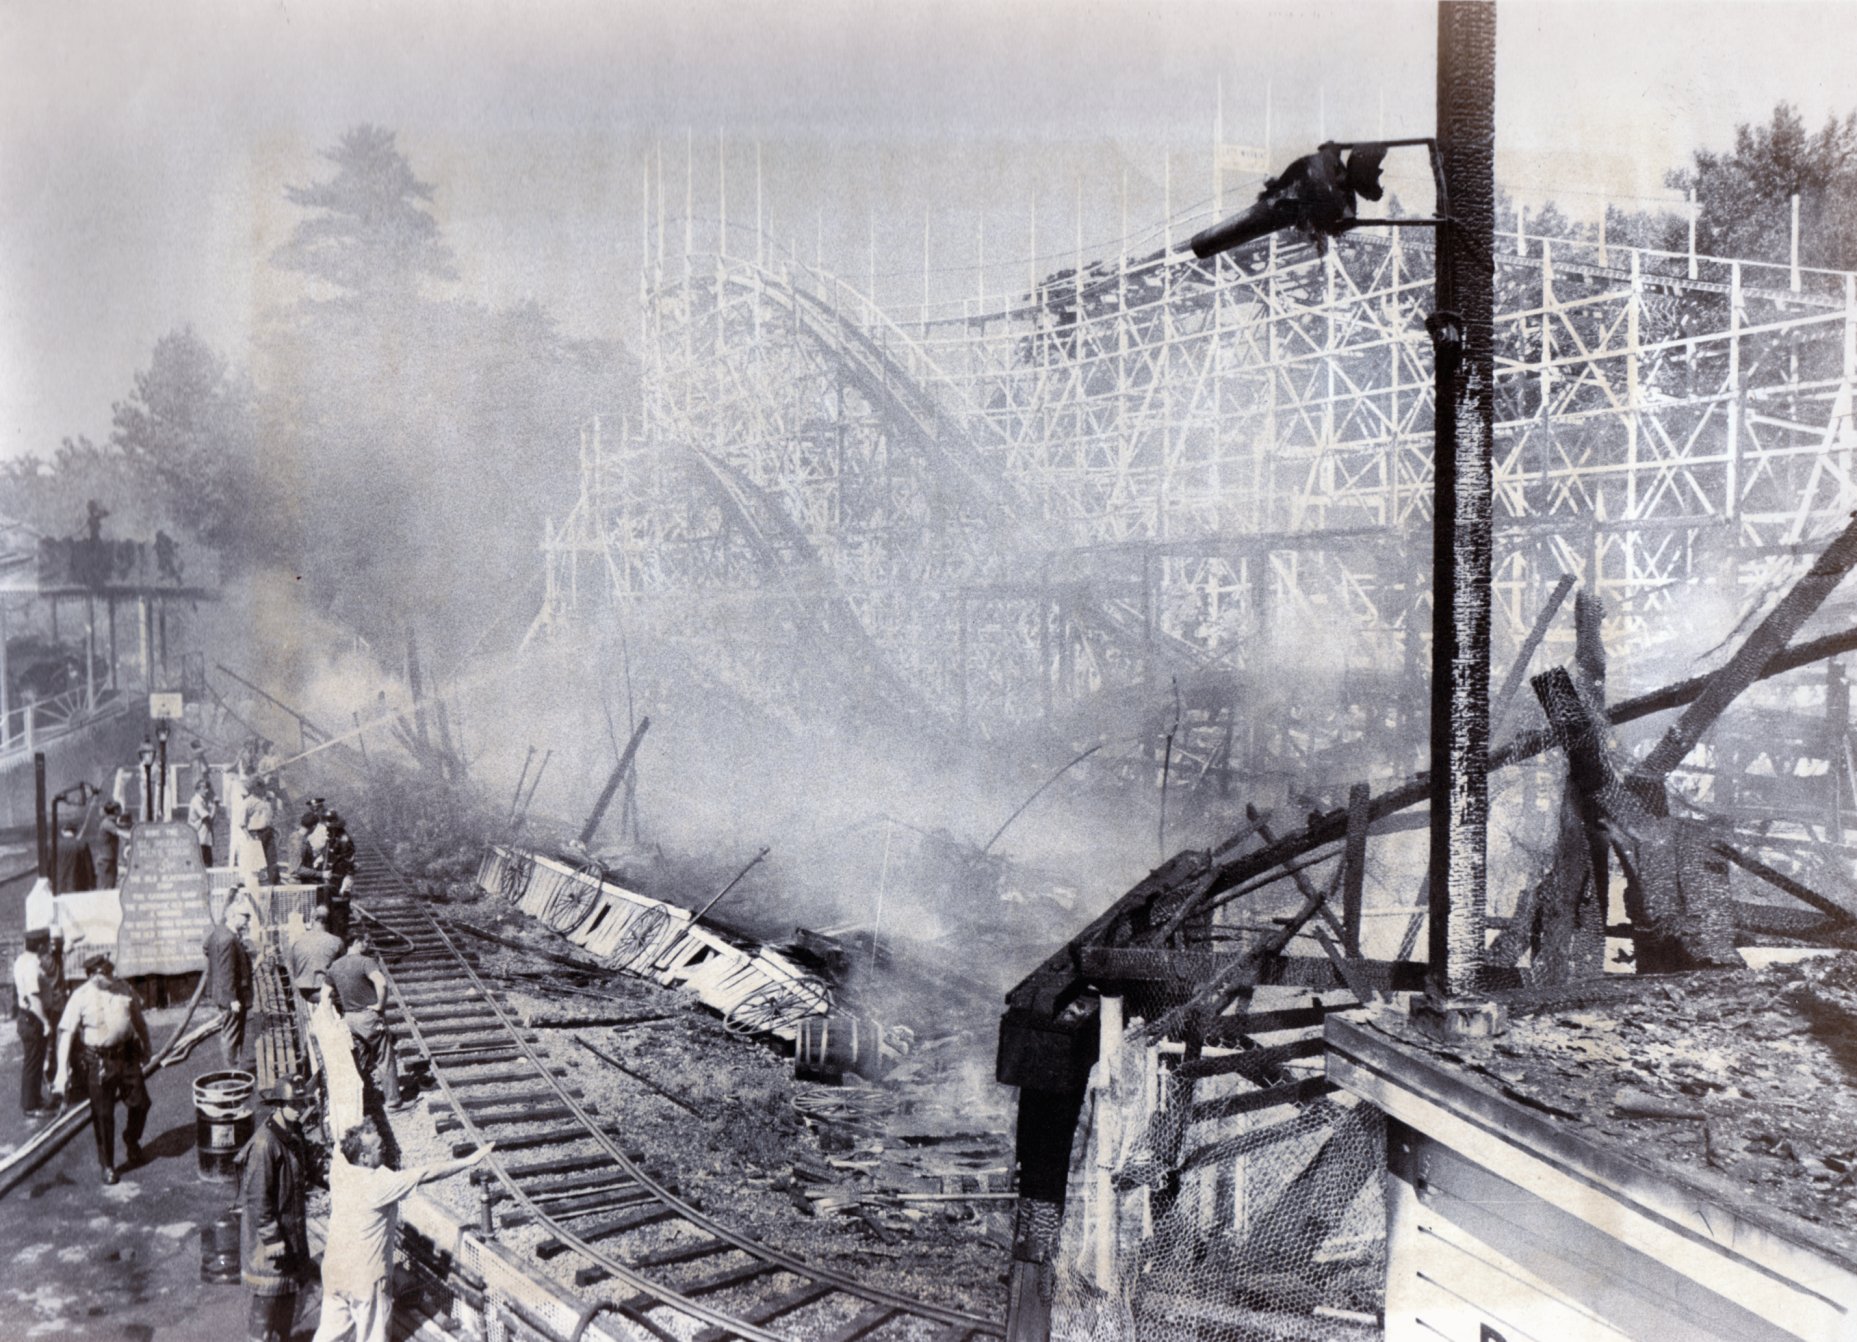 Sept. 2, 1971 - Agawam - Smoke rises from what used to be the El Dorado Mine Train ride at Riverside Park. A fire burned down the ride and put the adjacent roller coaster out of commission. Two Riverside employees and a firefighter were treated for smoke inhalation.